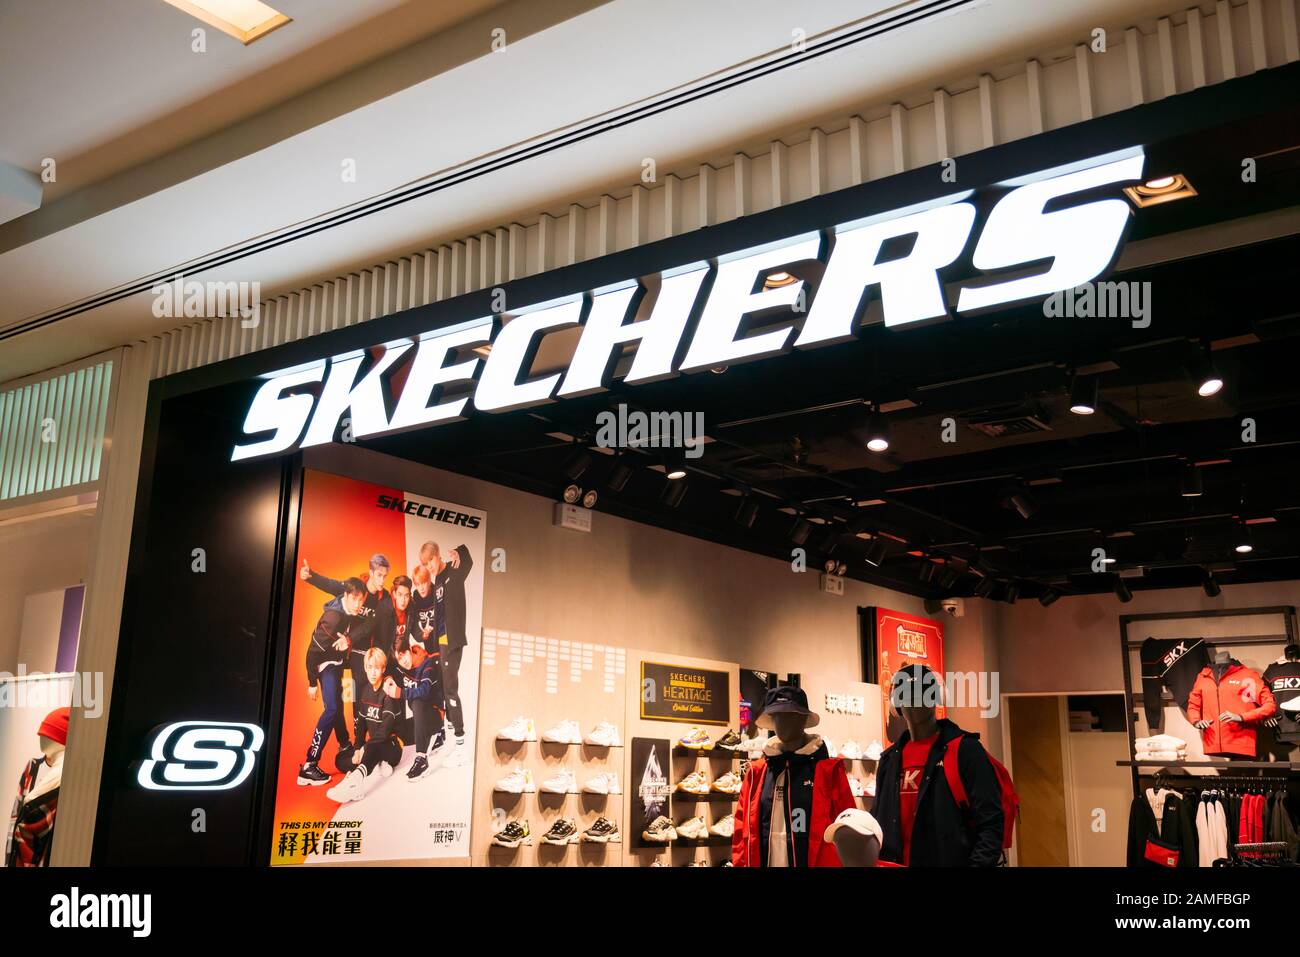 about skechers company